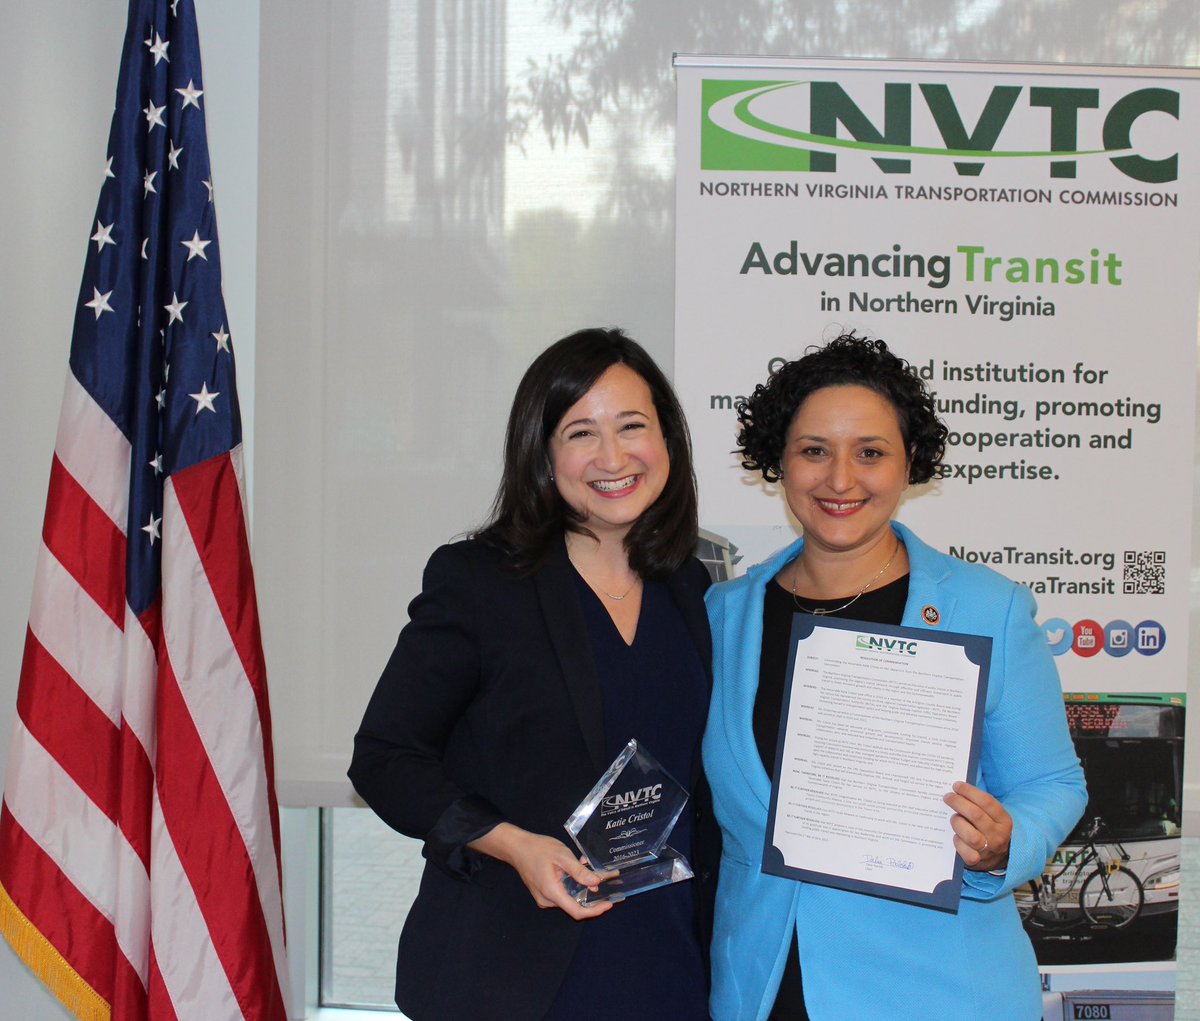 Tonight we thank @kcristol for her amazing service to NVTC as she leaves the Commission for a new adventure with the @tysons_va and we look forward to continued partnership on important #PublicTransit projects in NoVa.